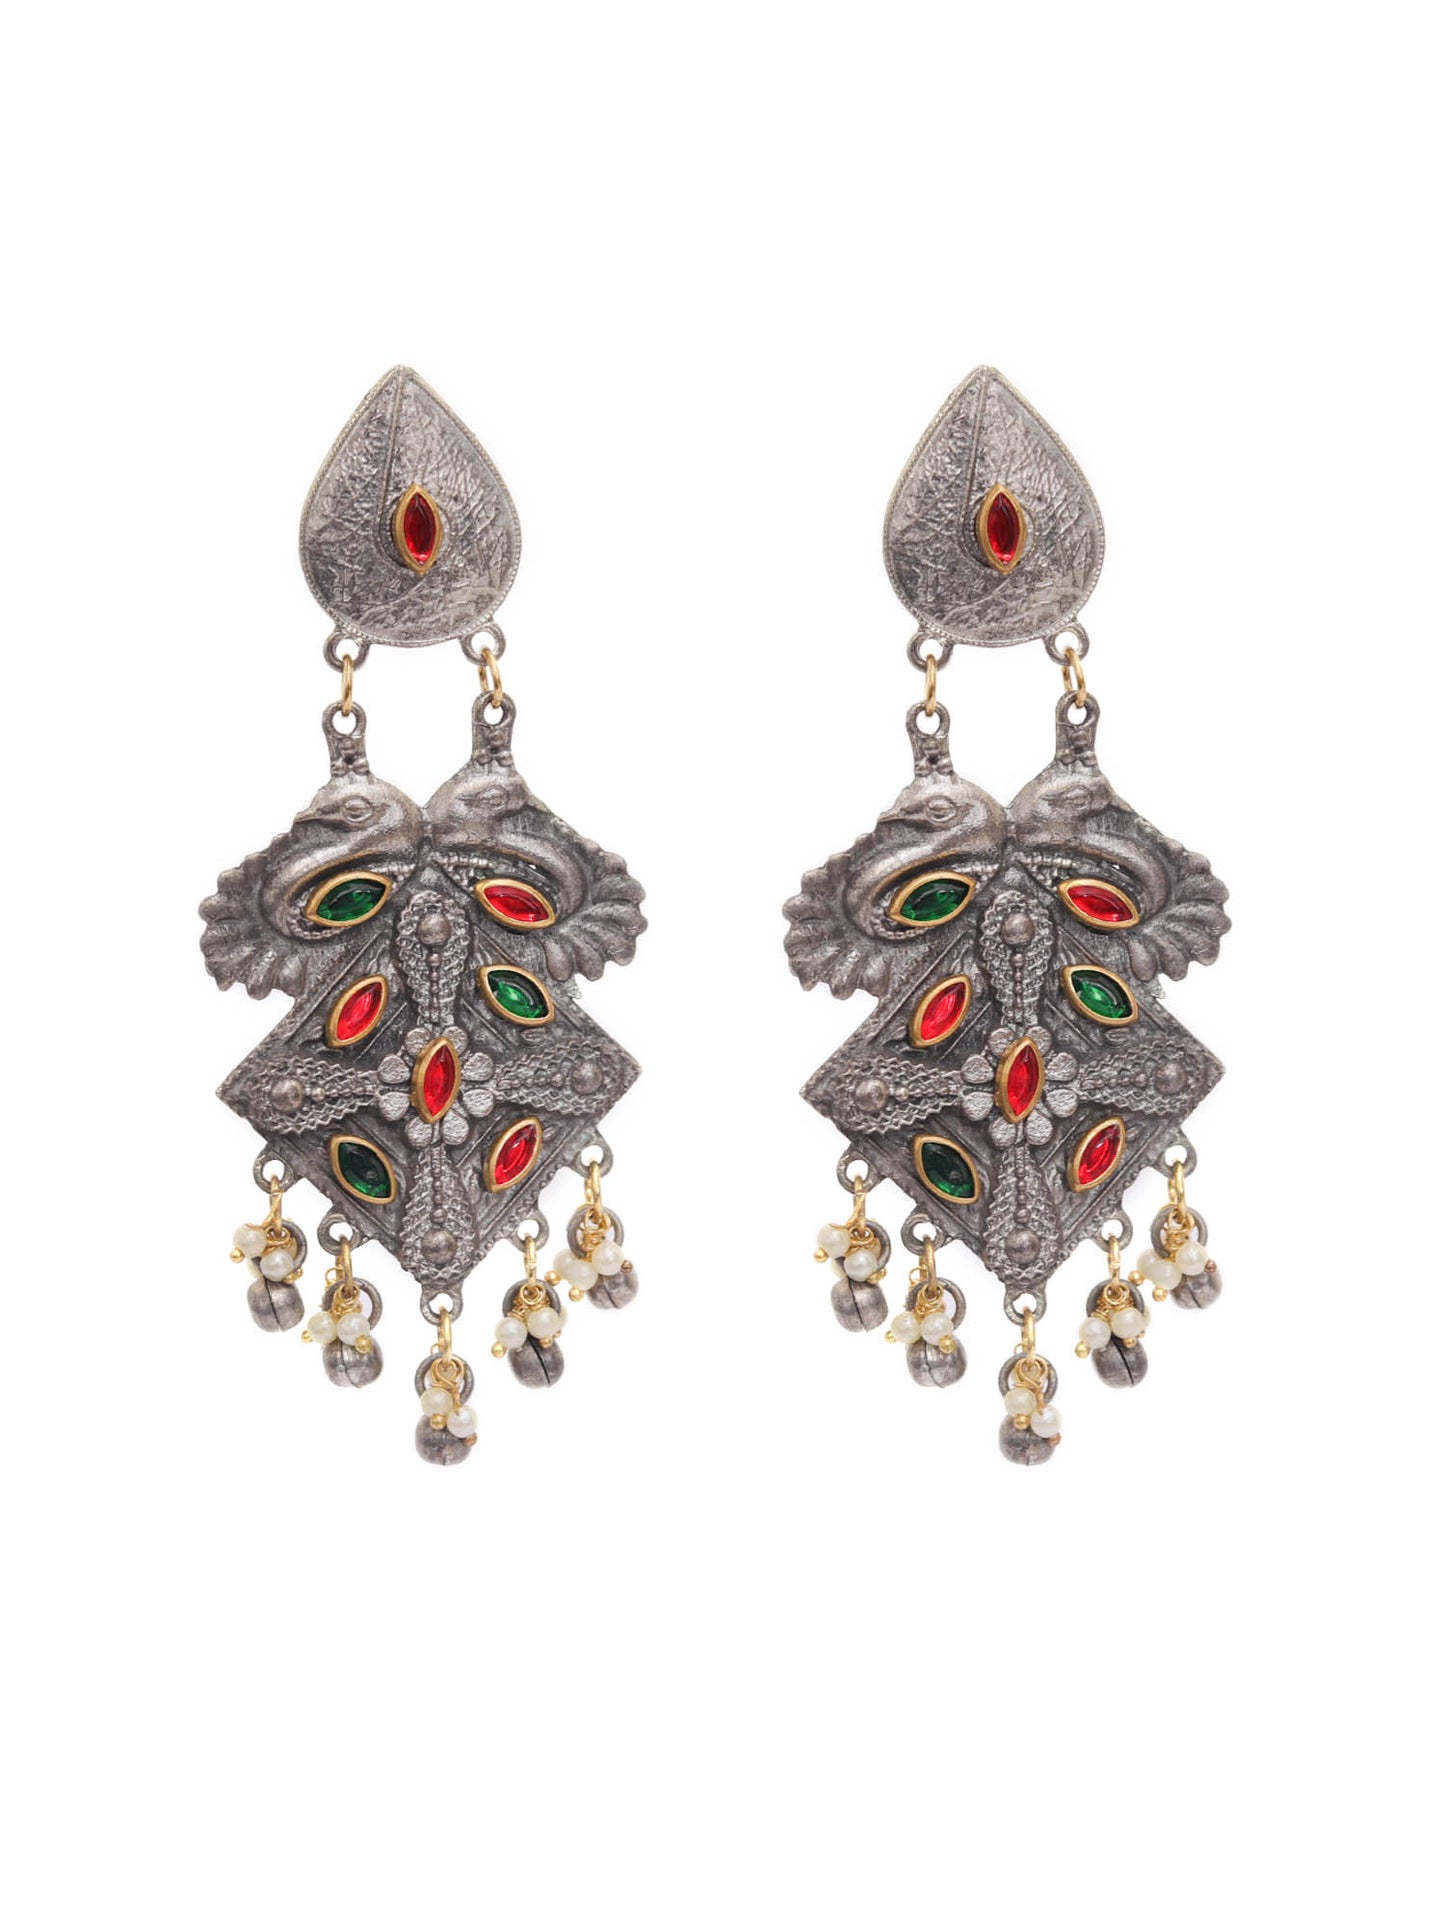 The Red & Green Stone Artistry Earrings